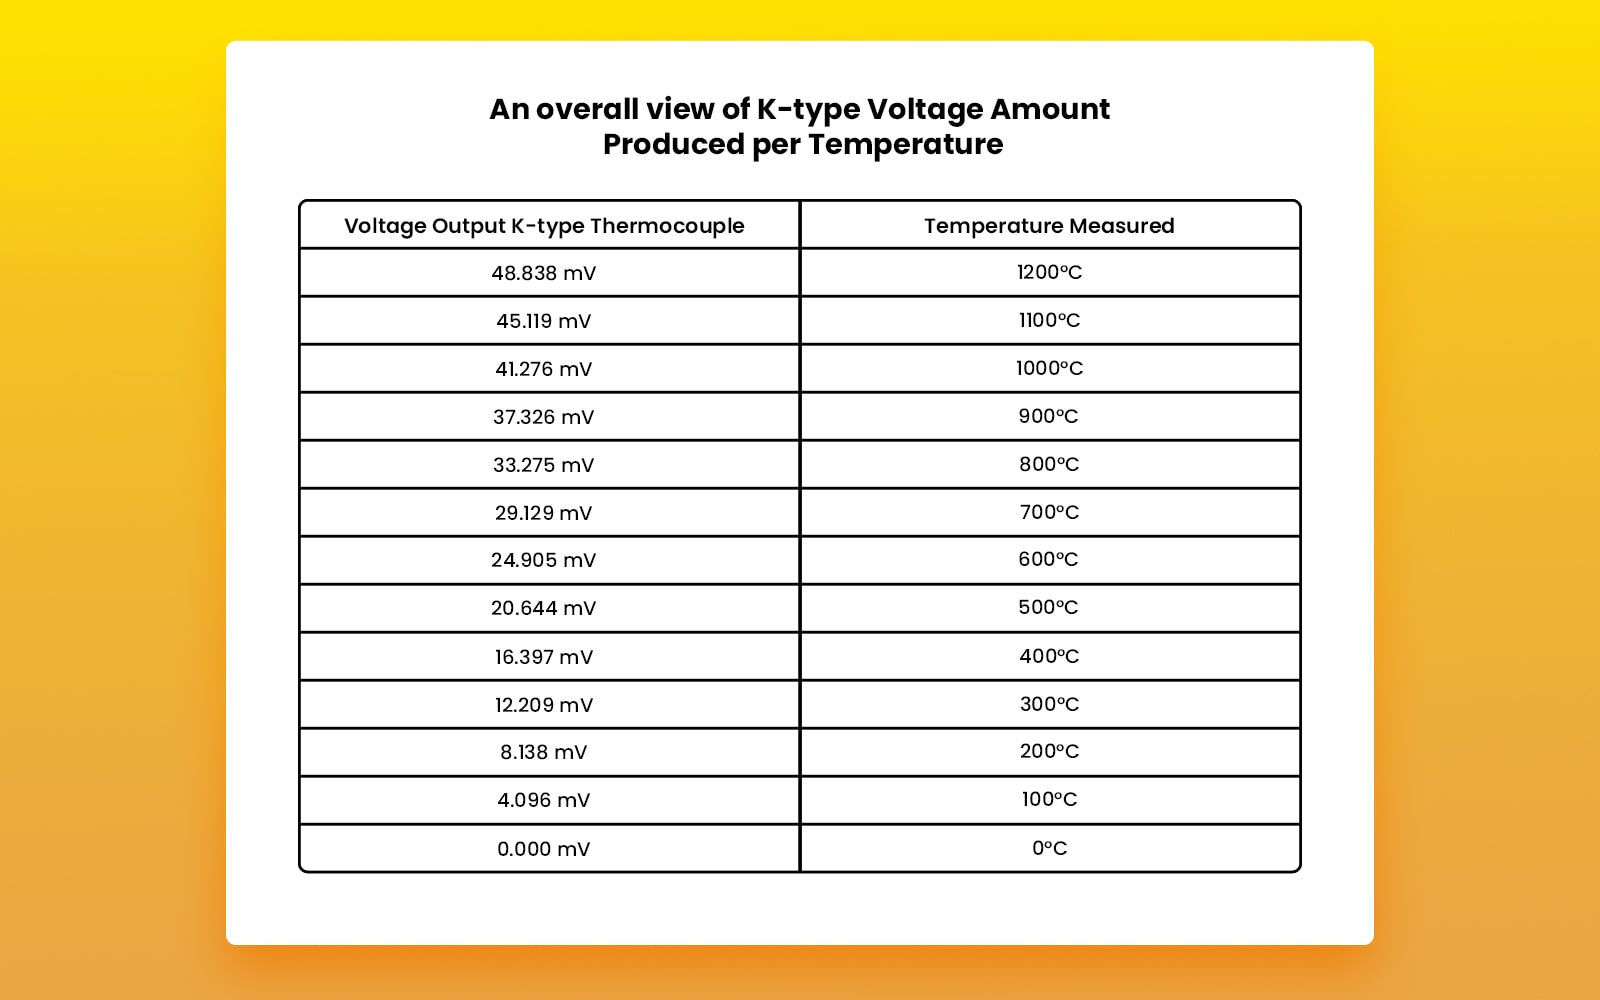 An overall view of K-type Voltage Amount